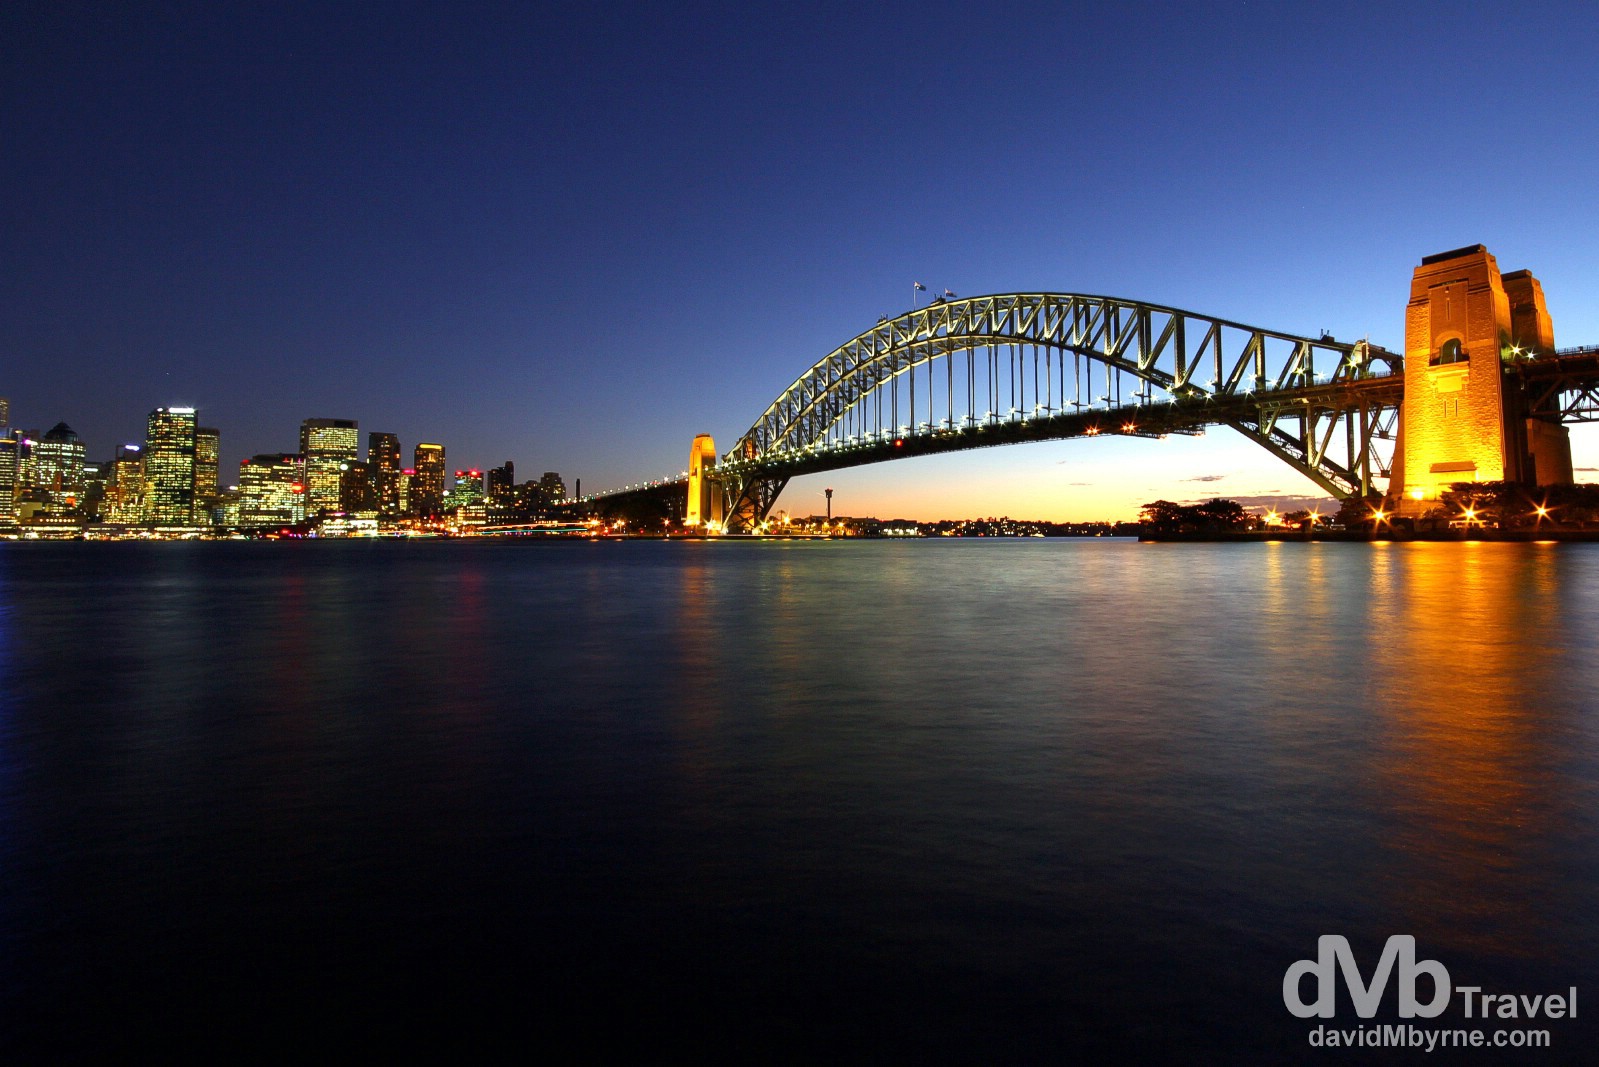 The Sydney Harbour Bridge & CBD skyline at dusk as seen from the Kirribilli district of the city. June 7th 2012.  